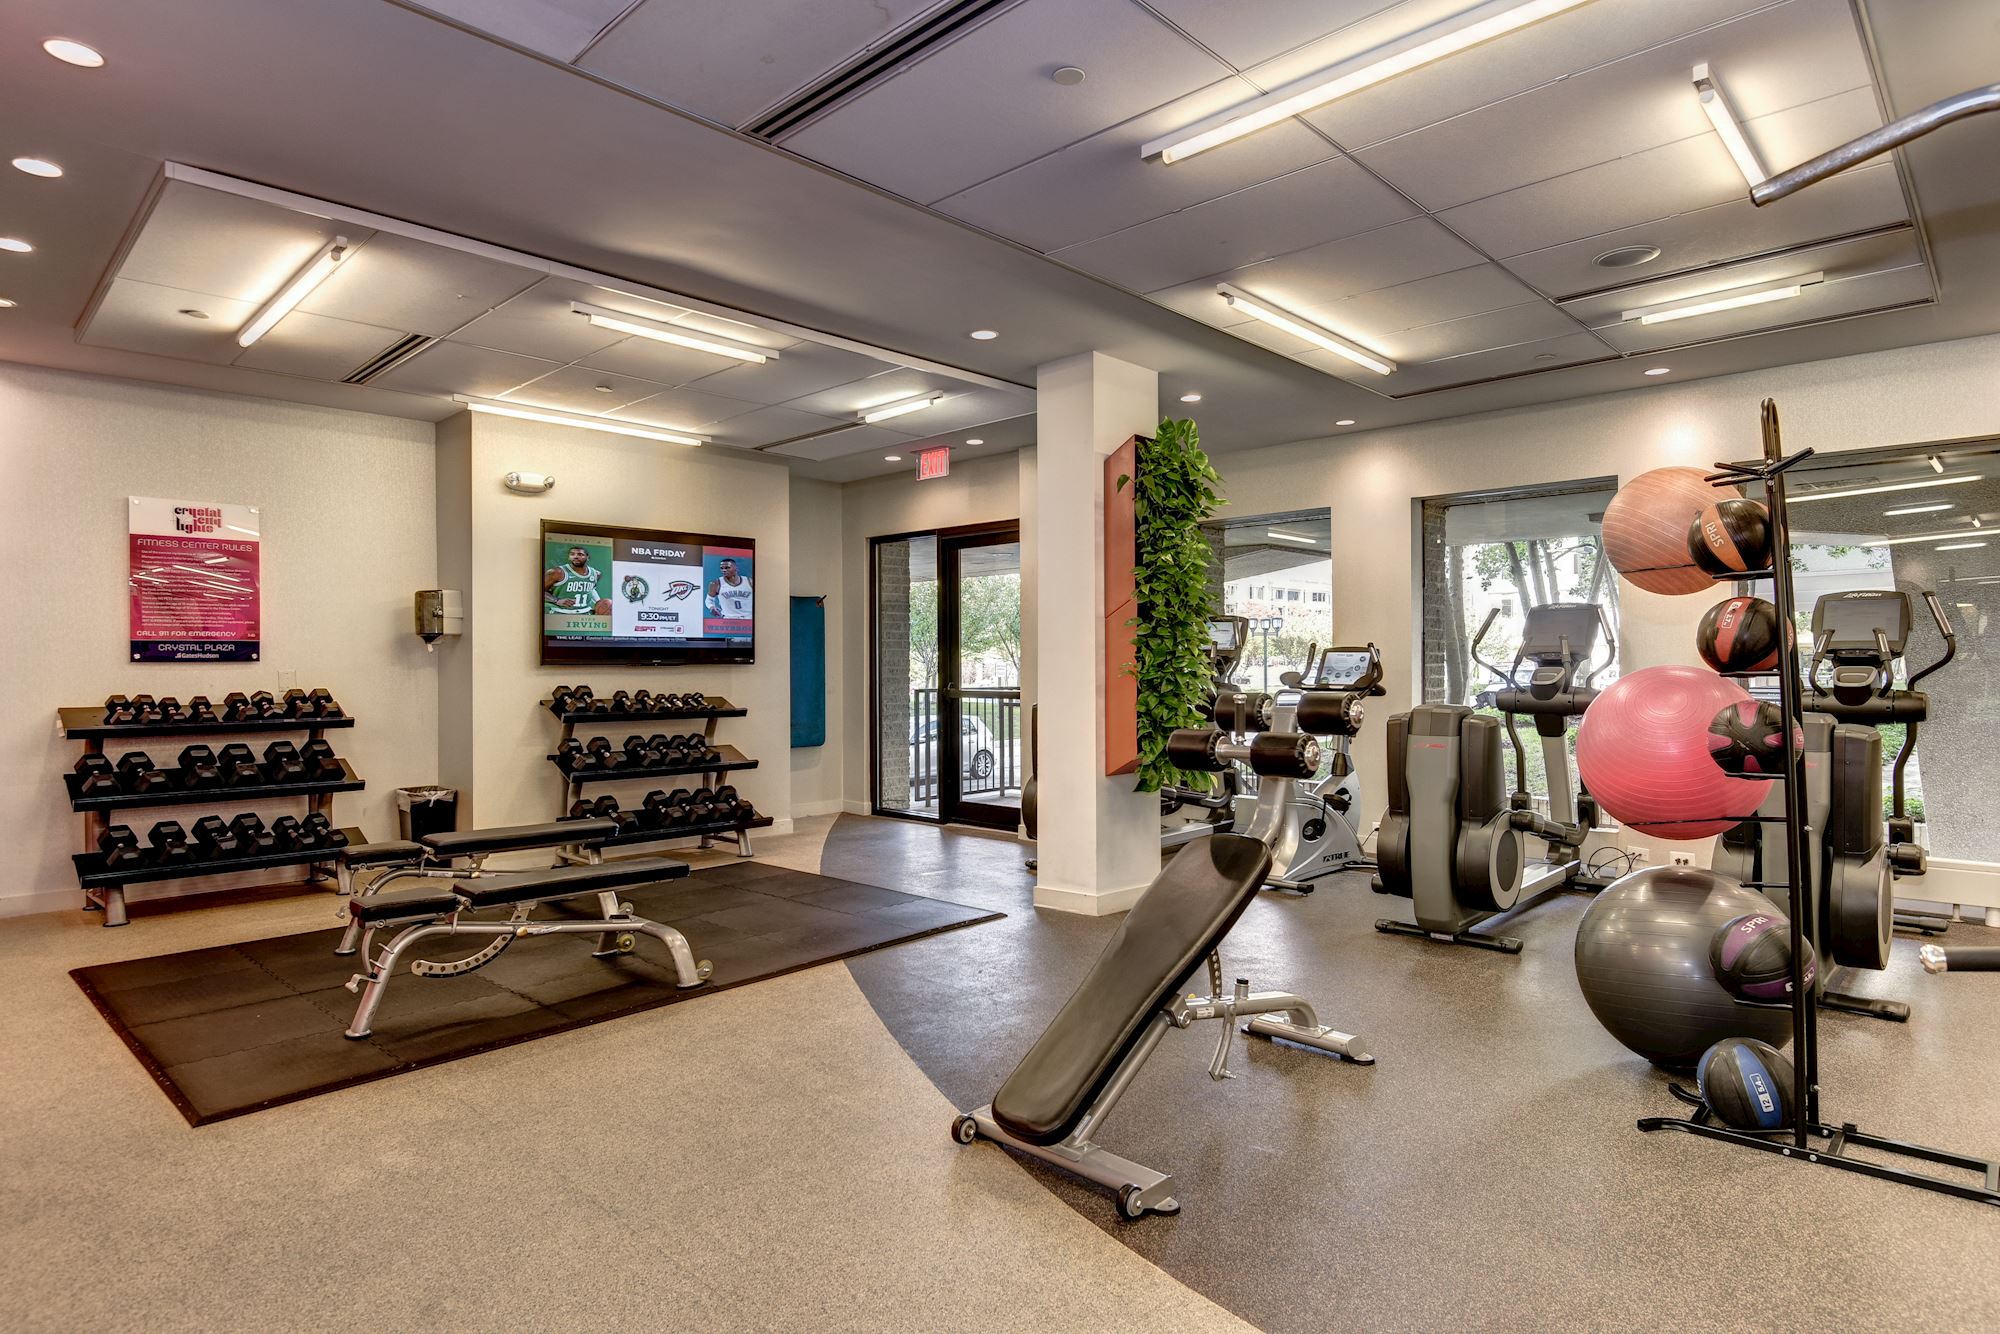 Crystal Plaza Apartments Fitness Center